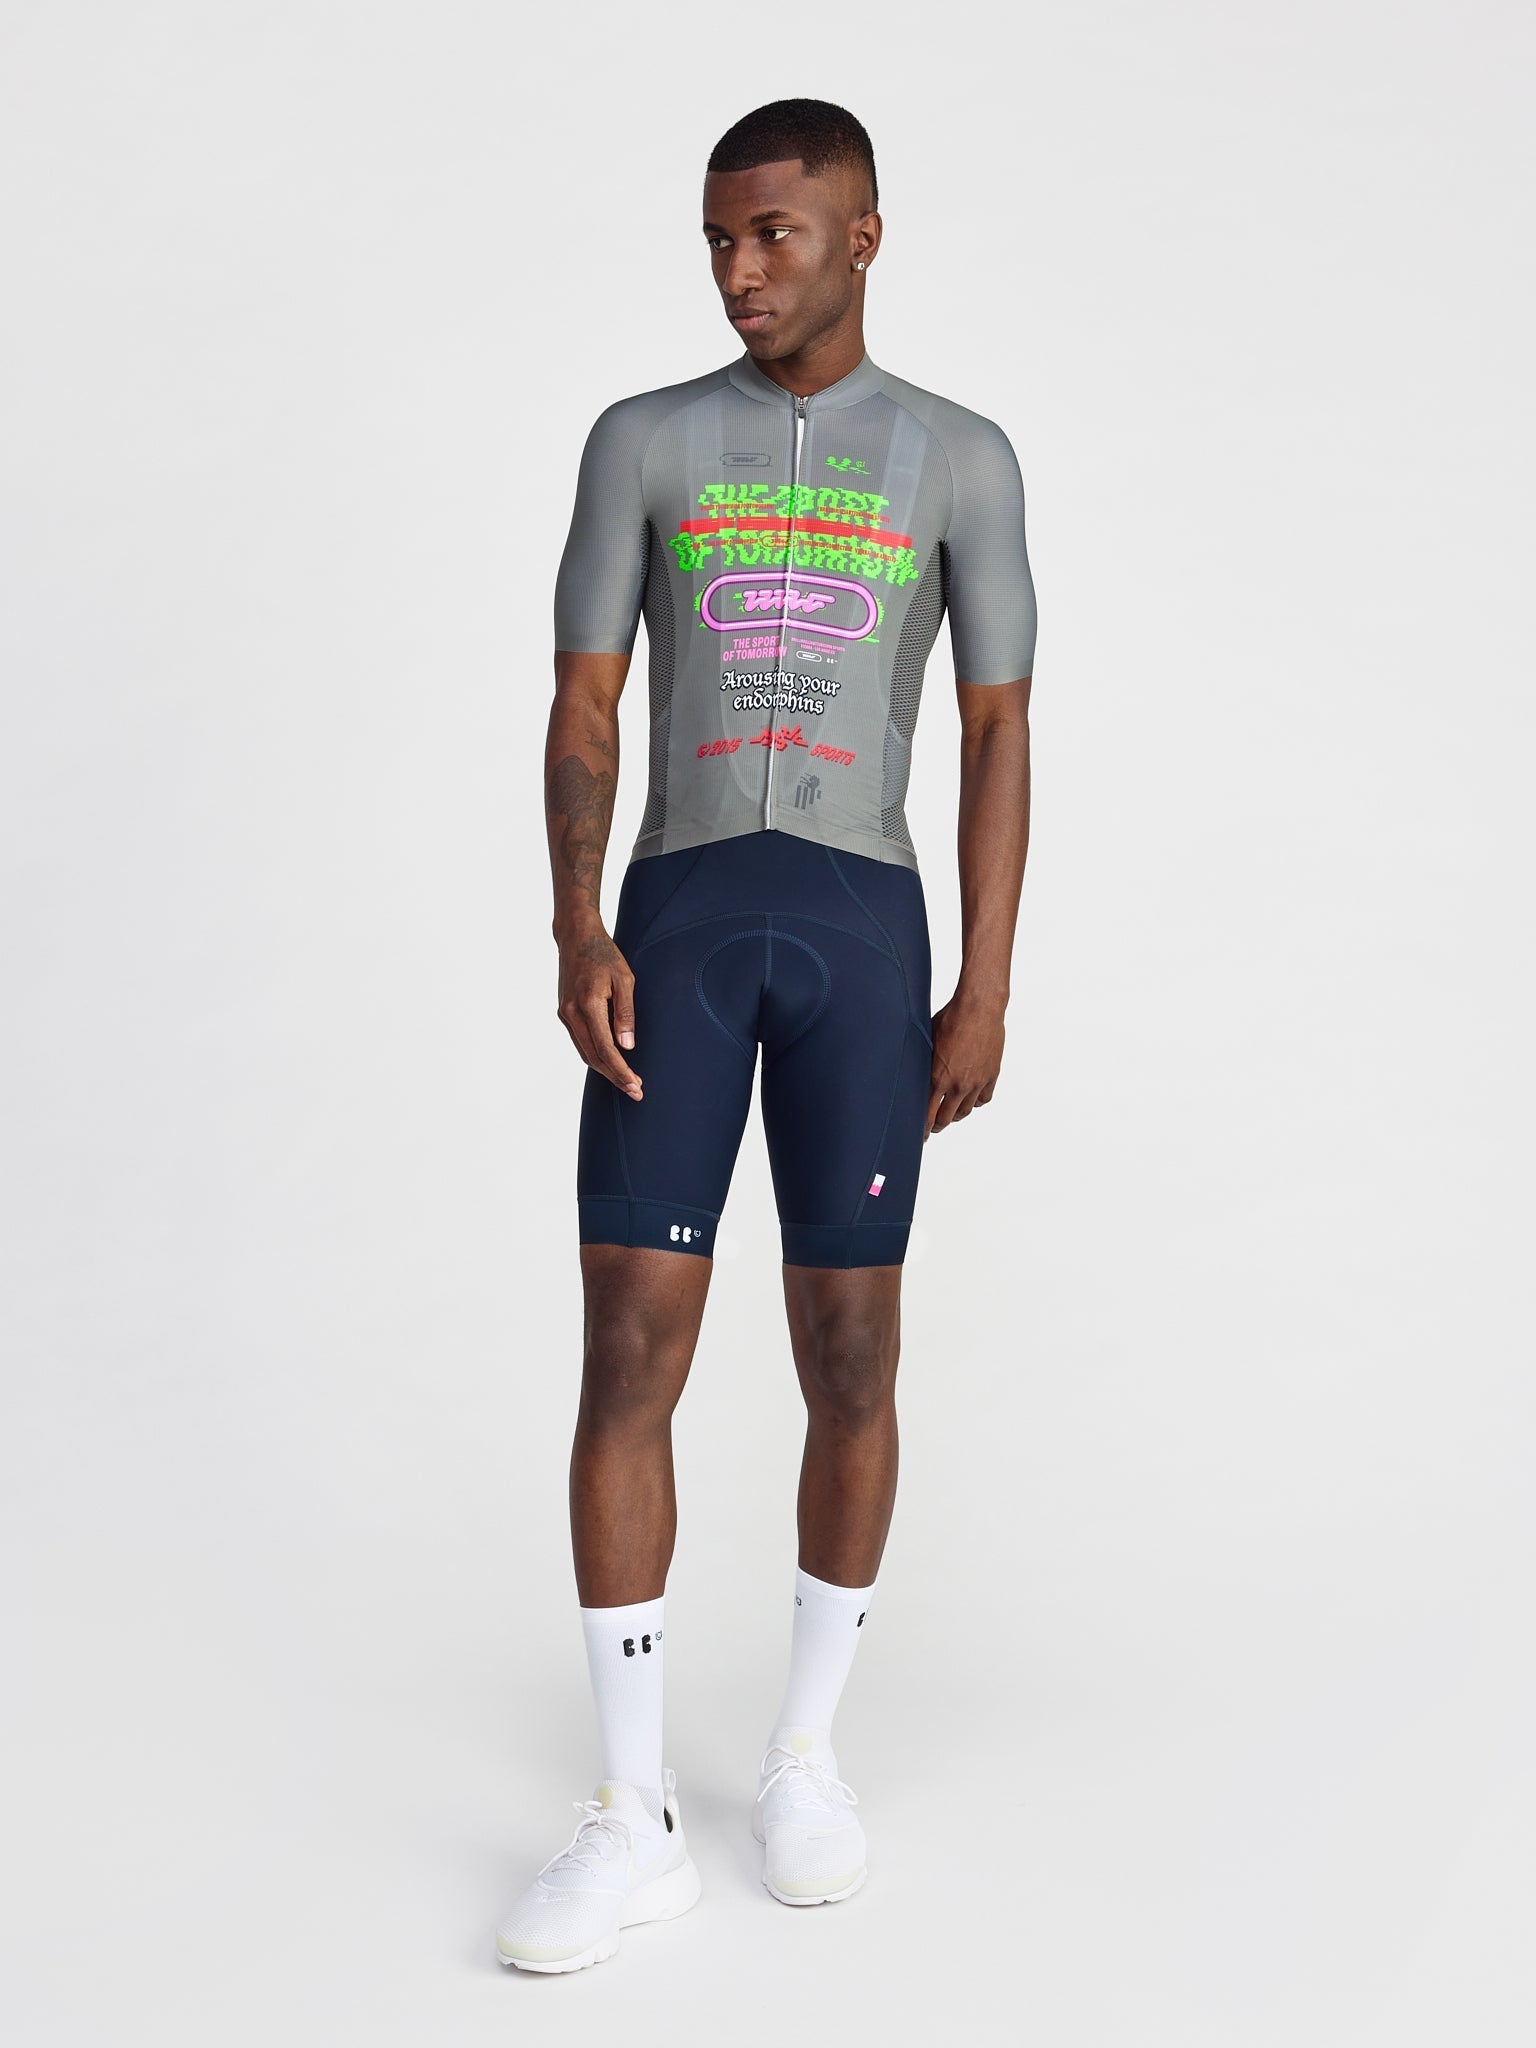 TSOT Team Jersey Olive | Cycling Jersey | SS23 The Sport of Tomorrow